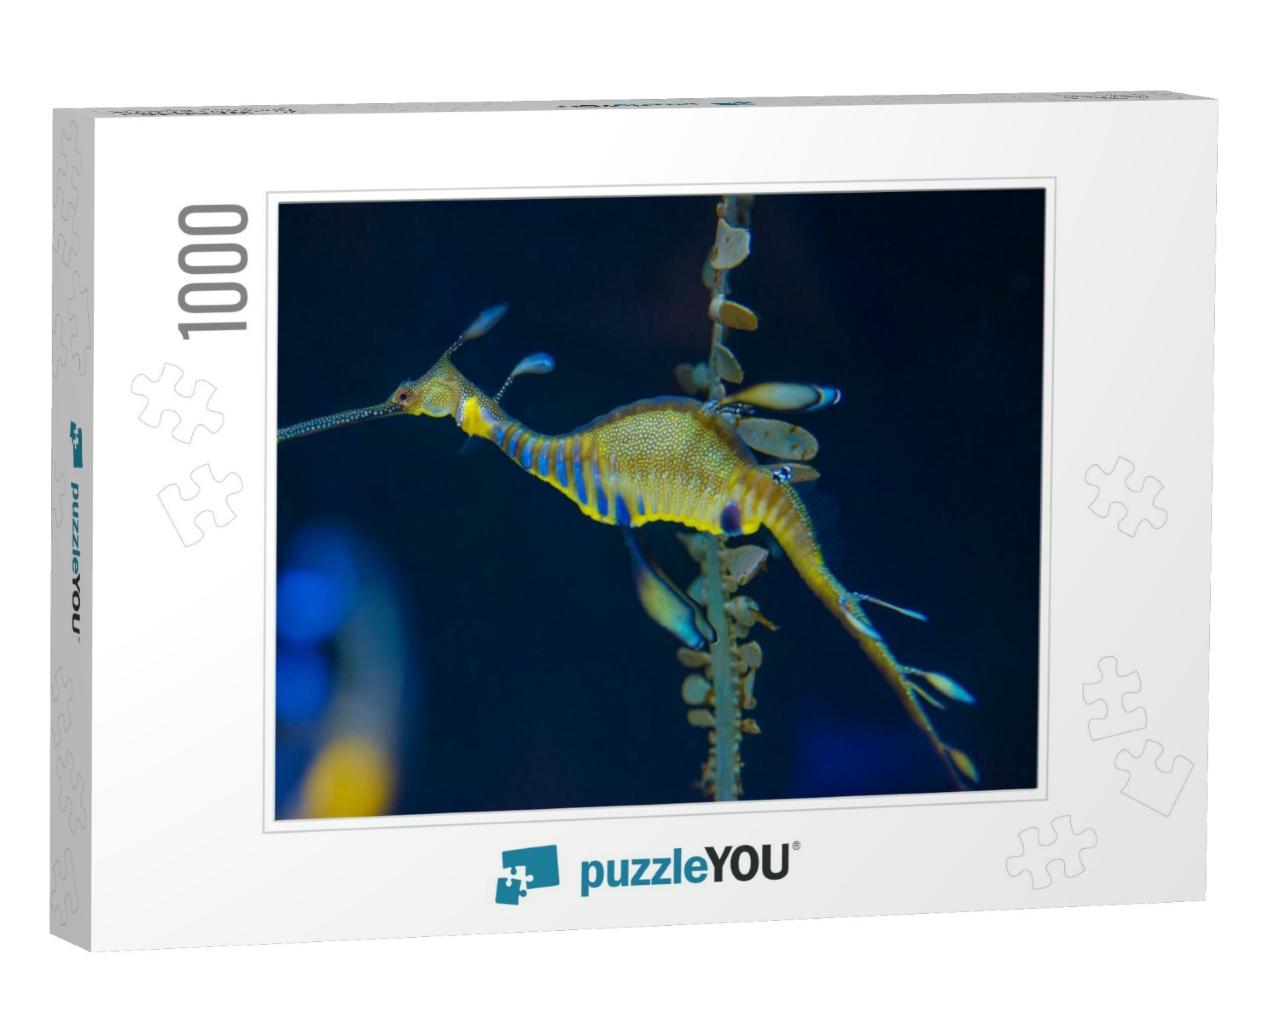 Seahorse in Colorful Salt Water Marine Aquarium... Jigsaw Puzzle with 1000 pieces